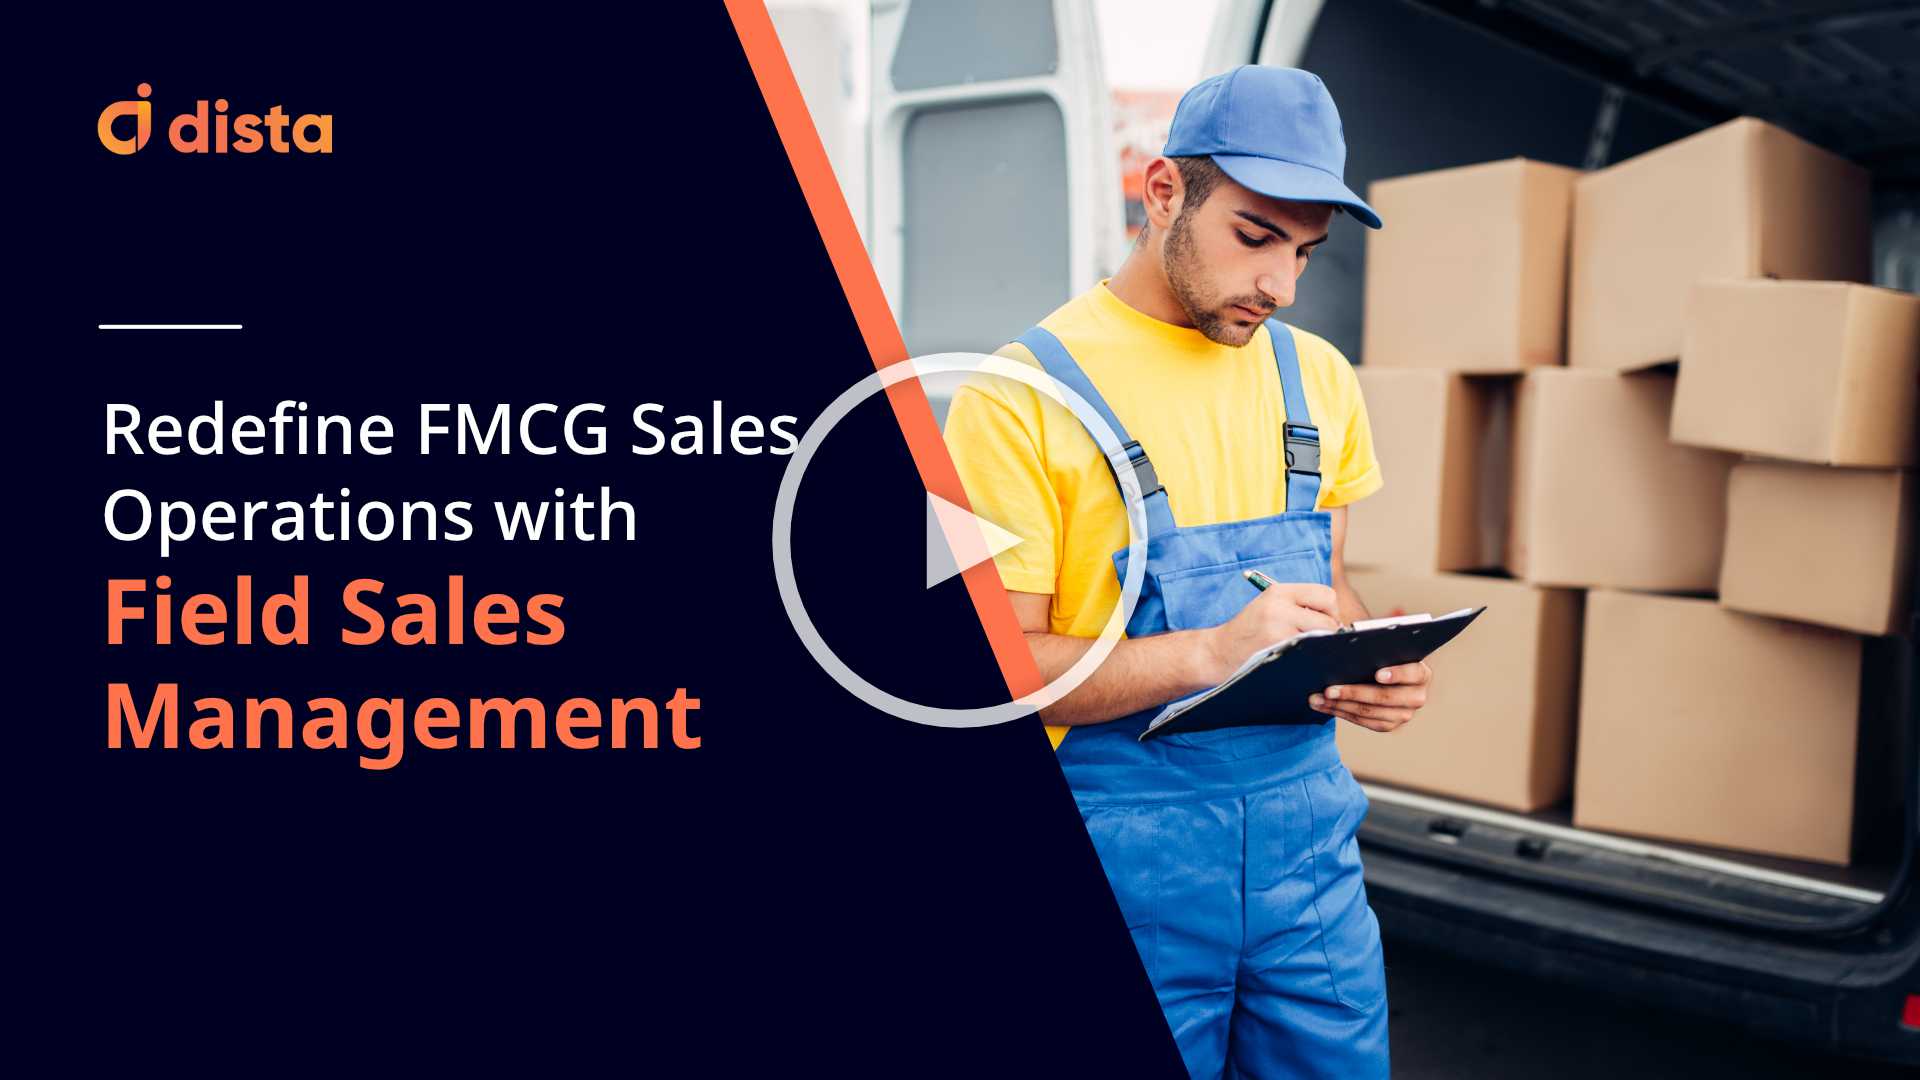 Redefine FMCG Sales Operations with Field Sales Management